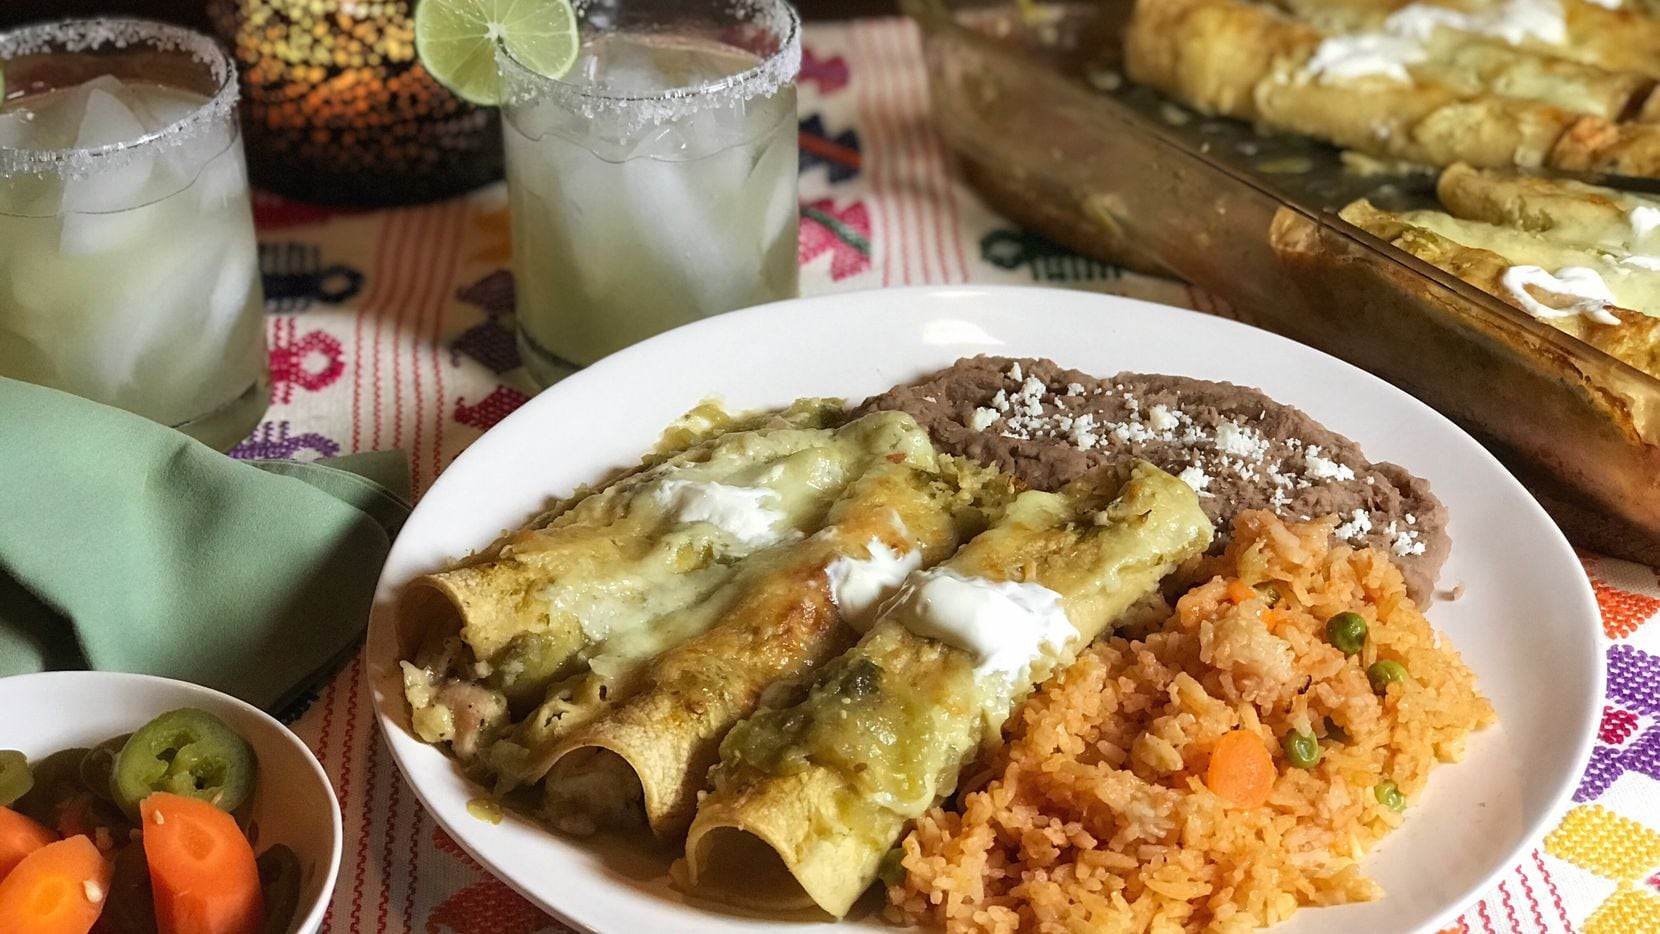 A plate of enchiladas verdes, Mexican rice and refried beans